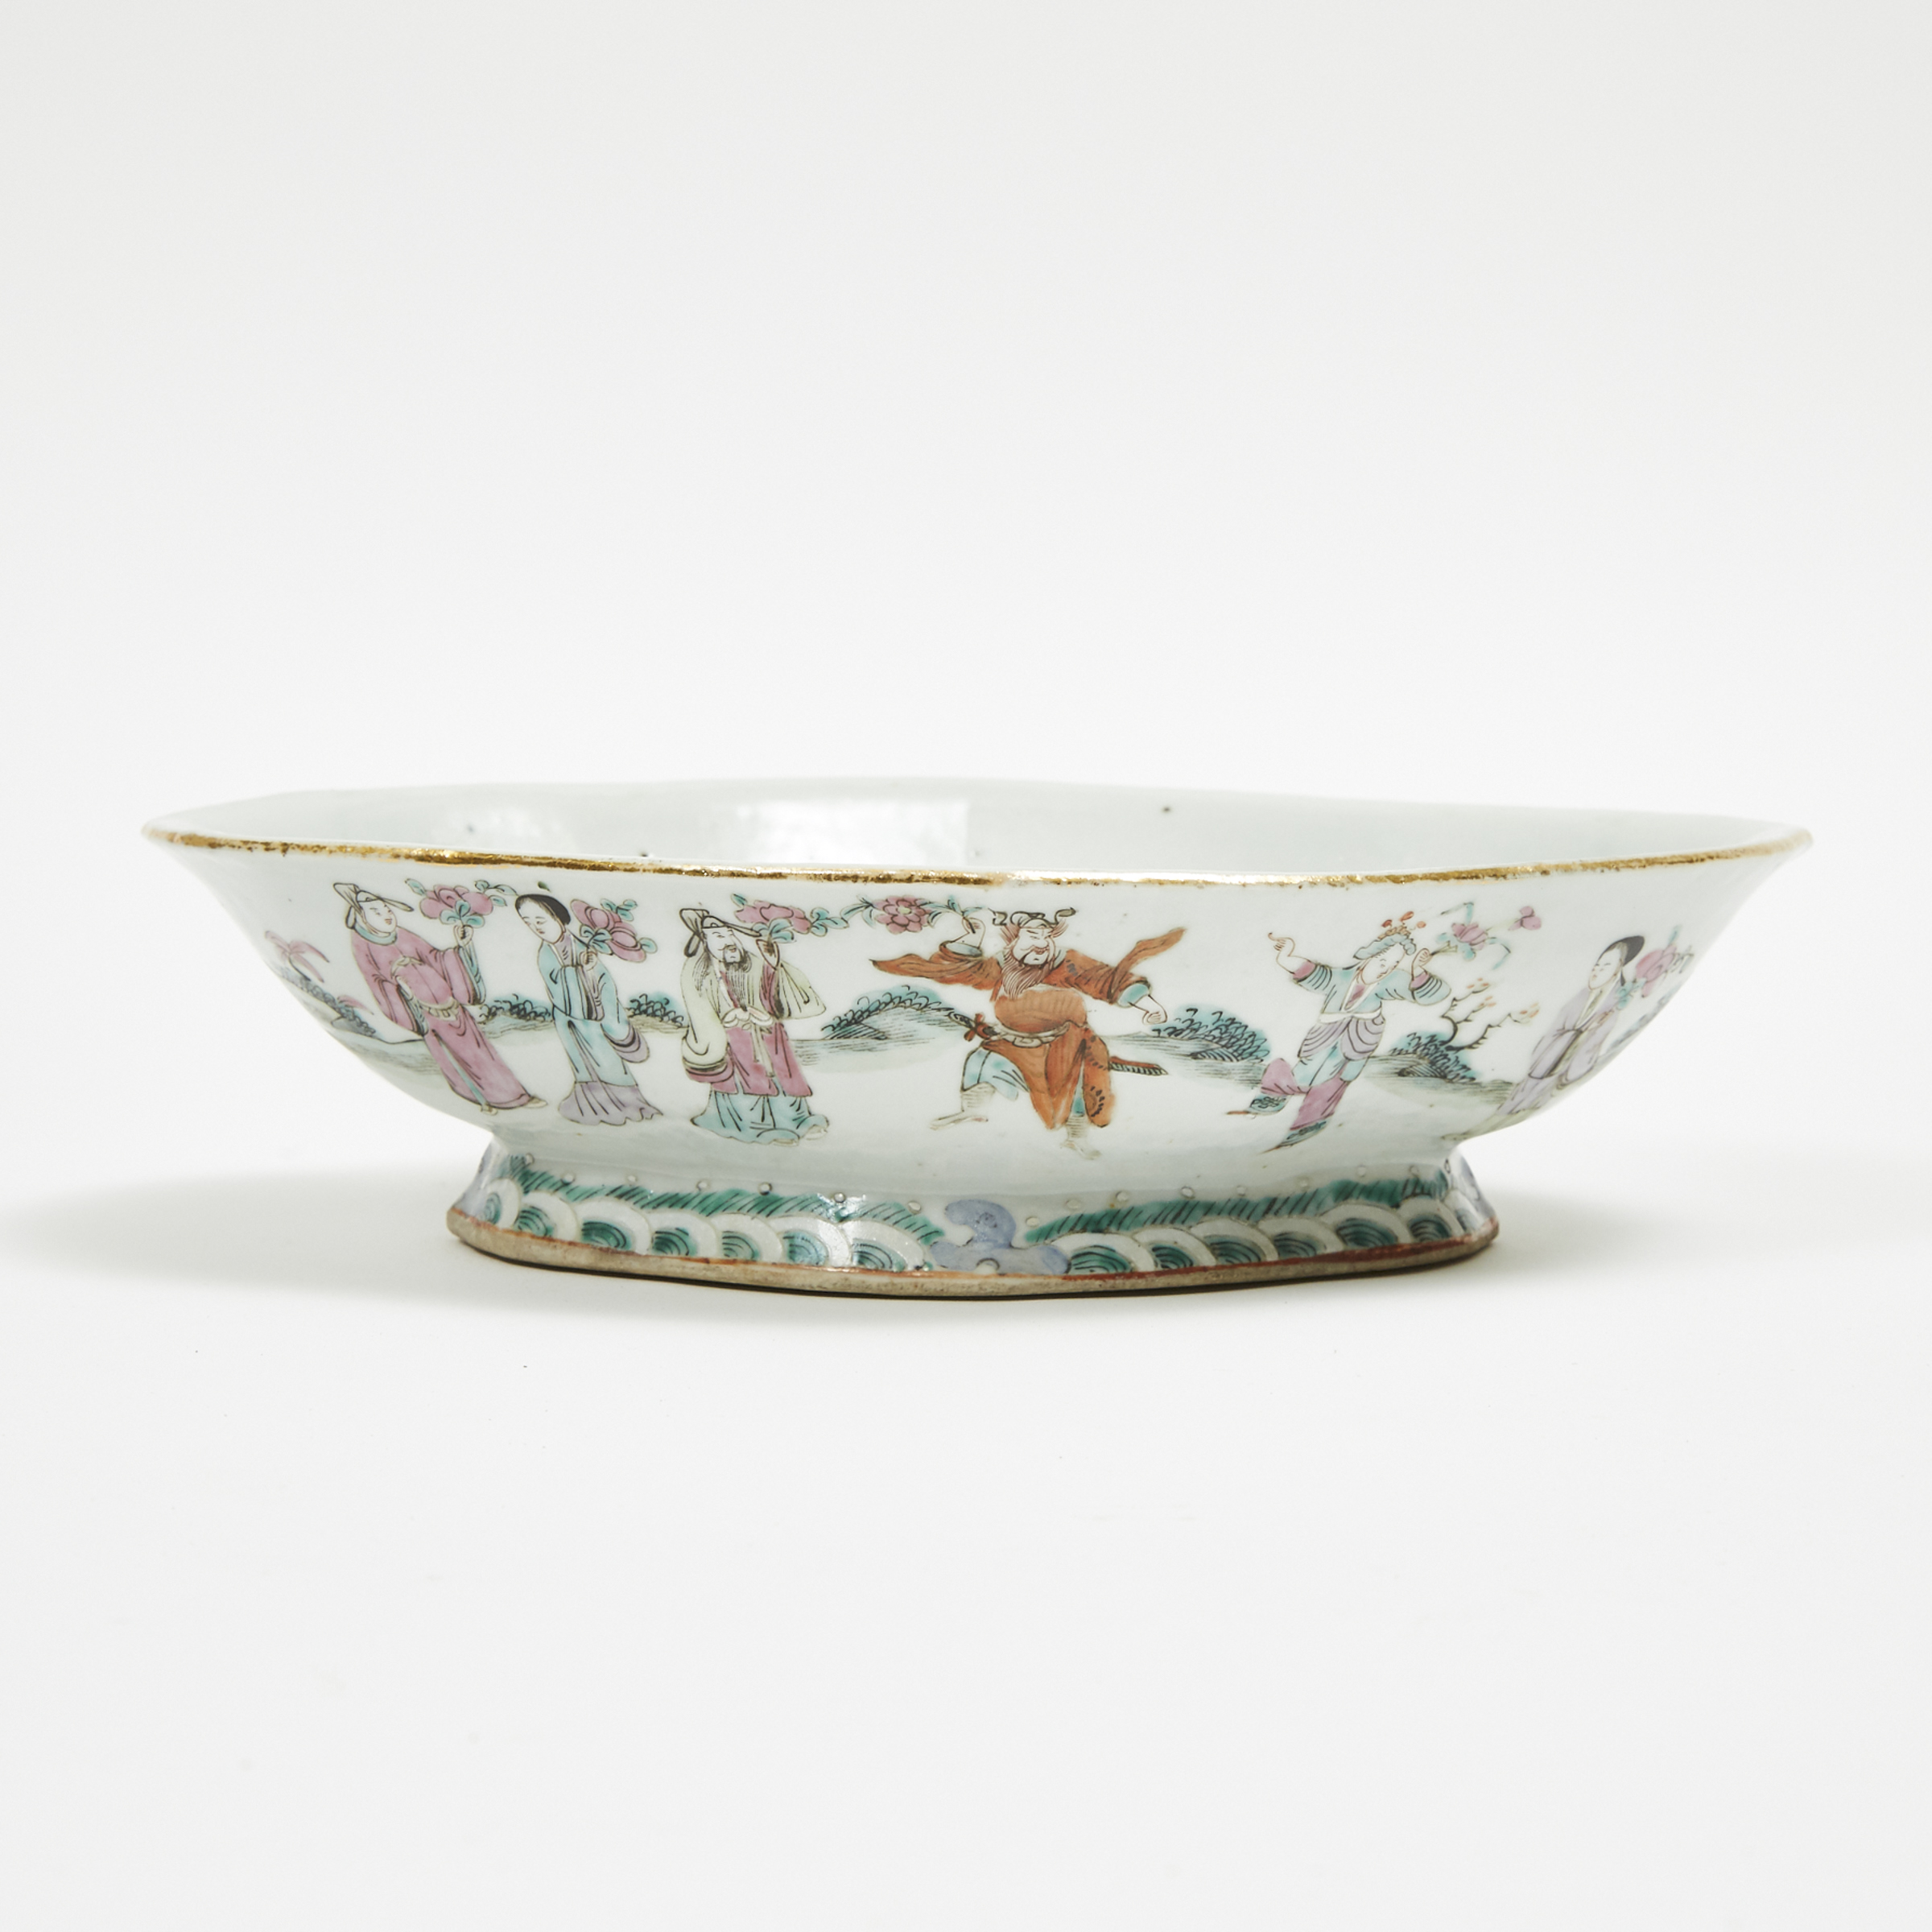 A Famille Rose 'Eight Immortals' Footed Dish, 19th Century